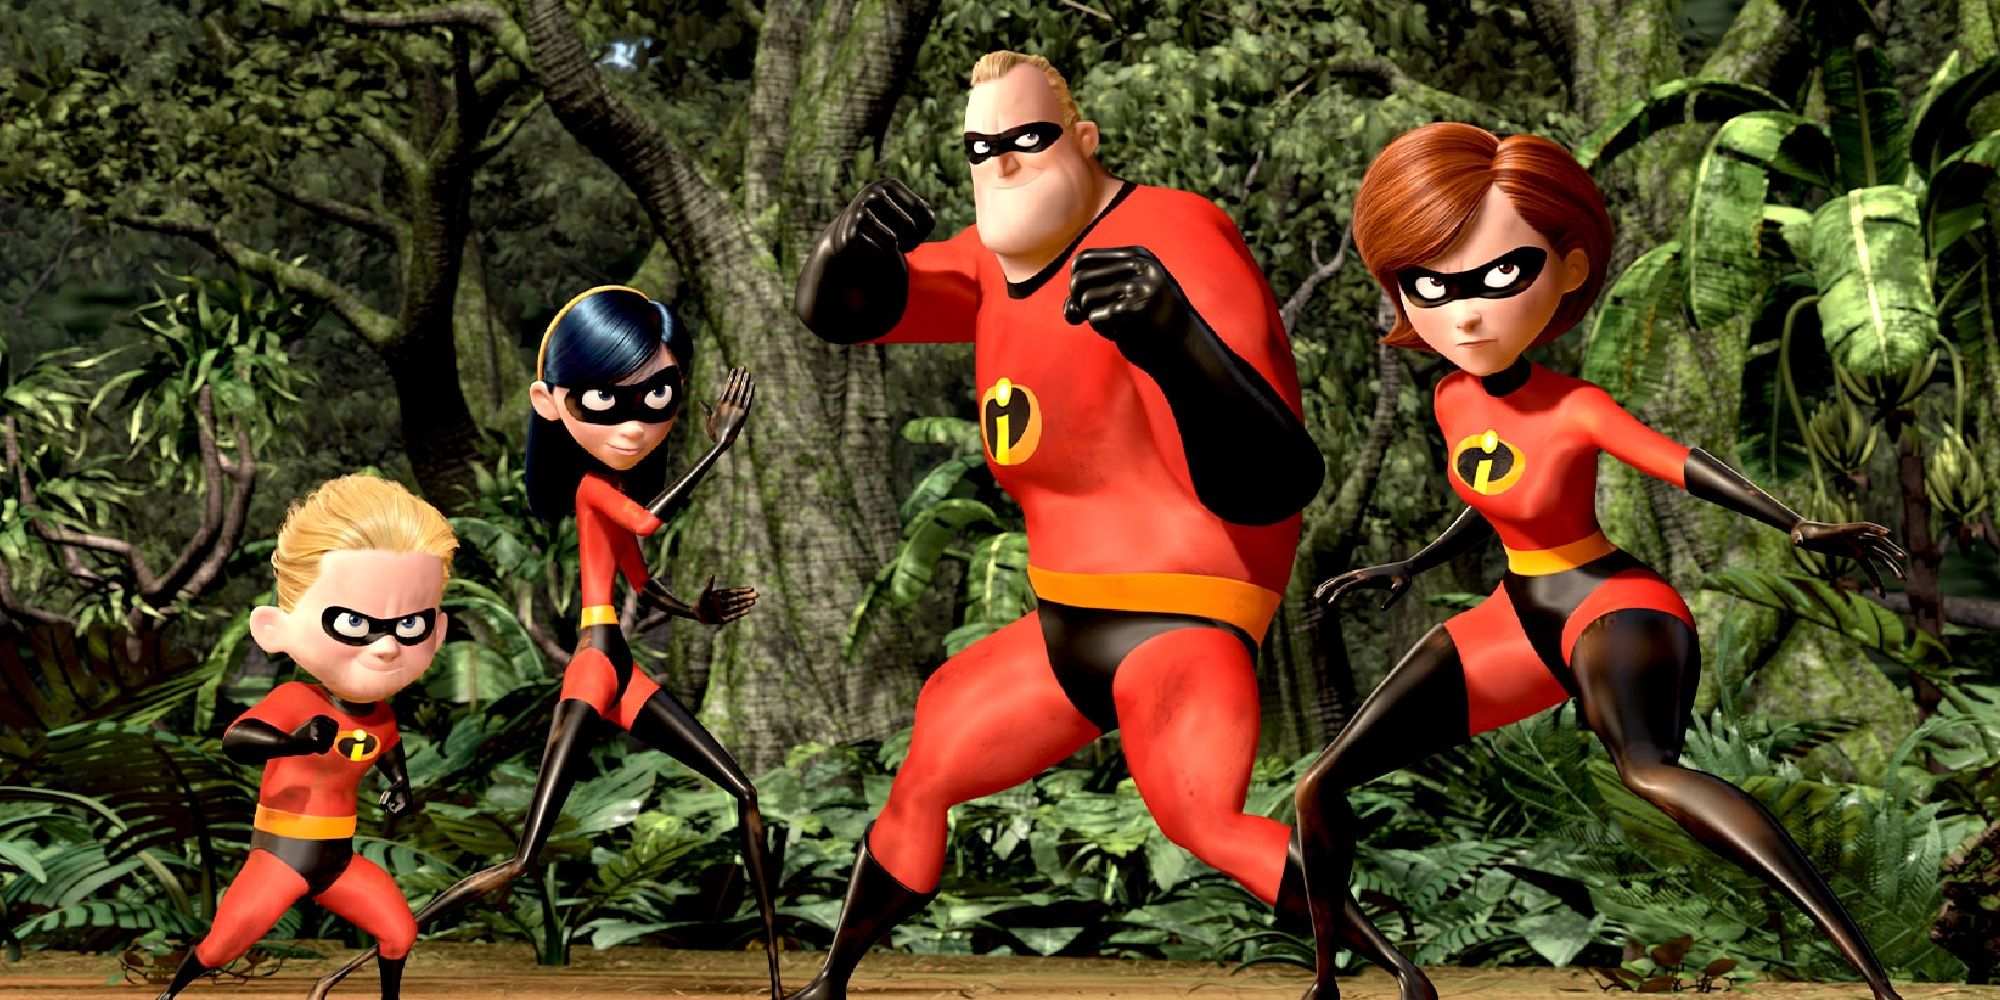 The Incredibles family posing together in the jungle in their iconic red outfits